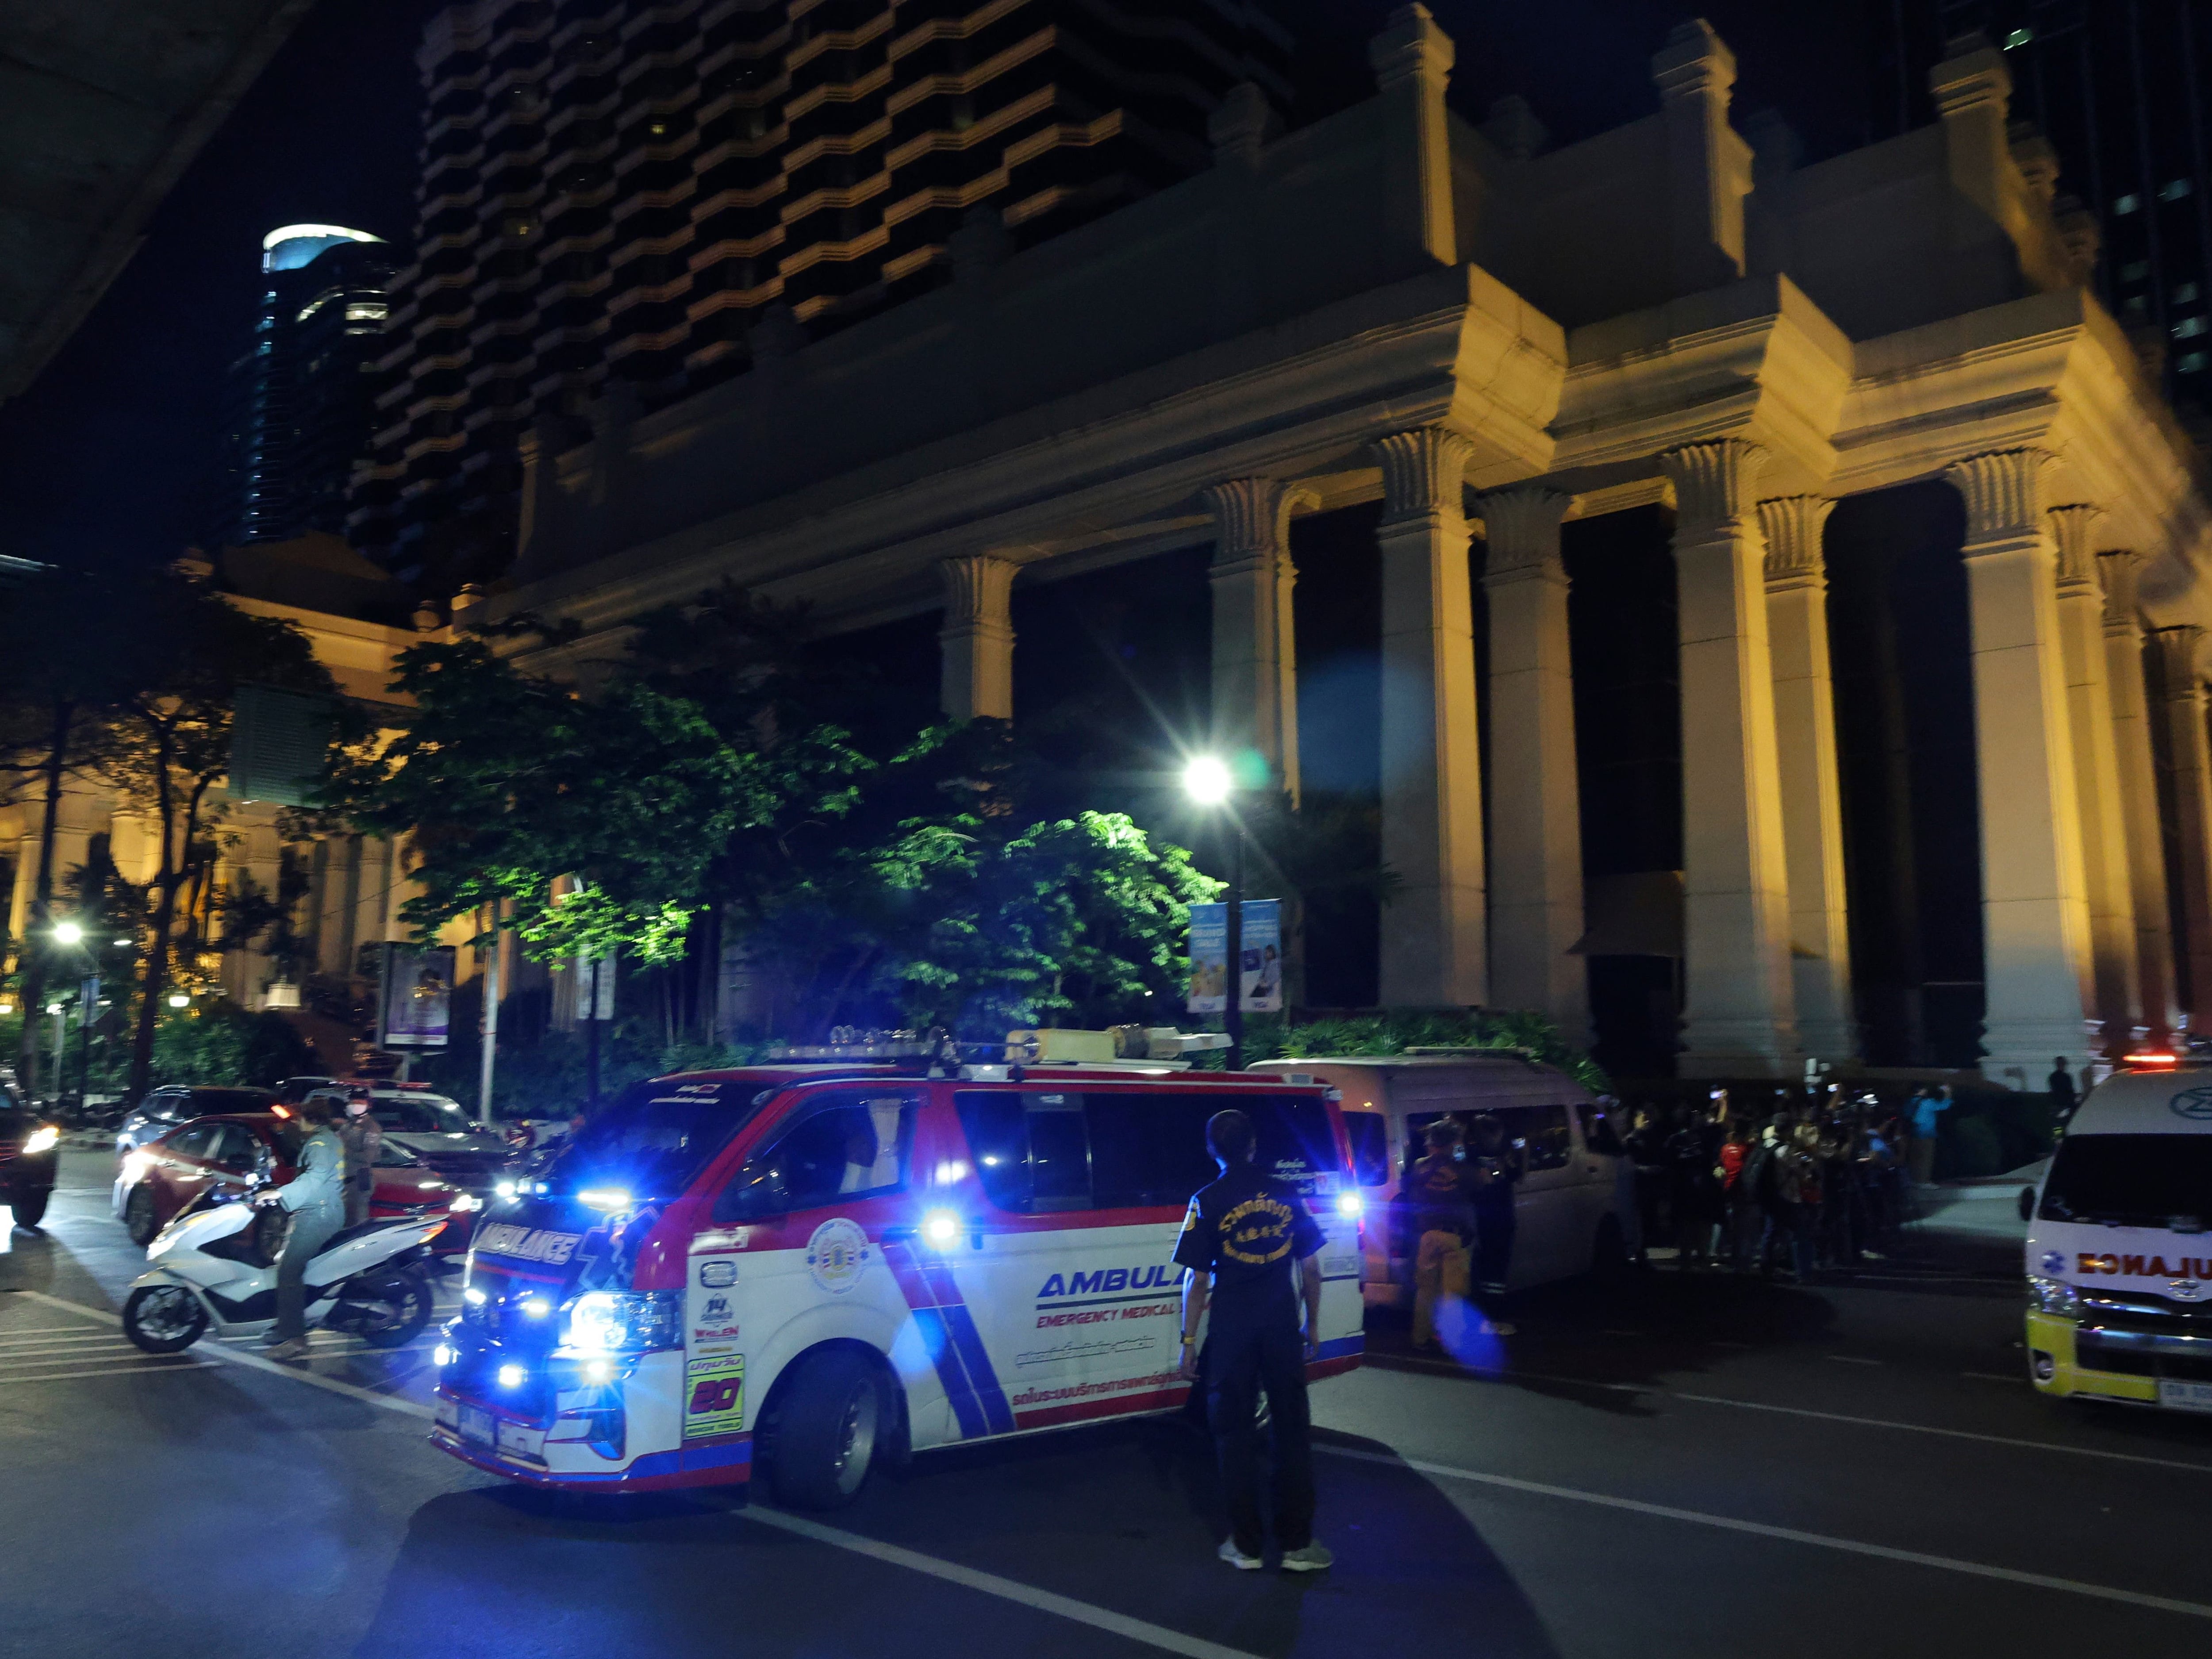 Cyanide traces discovered alongside six found dead in Bangkok hotel room